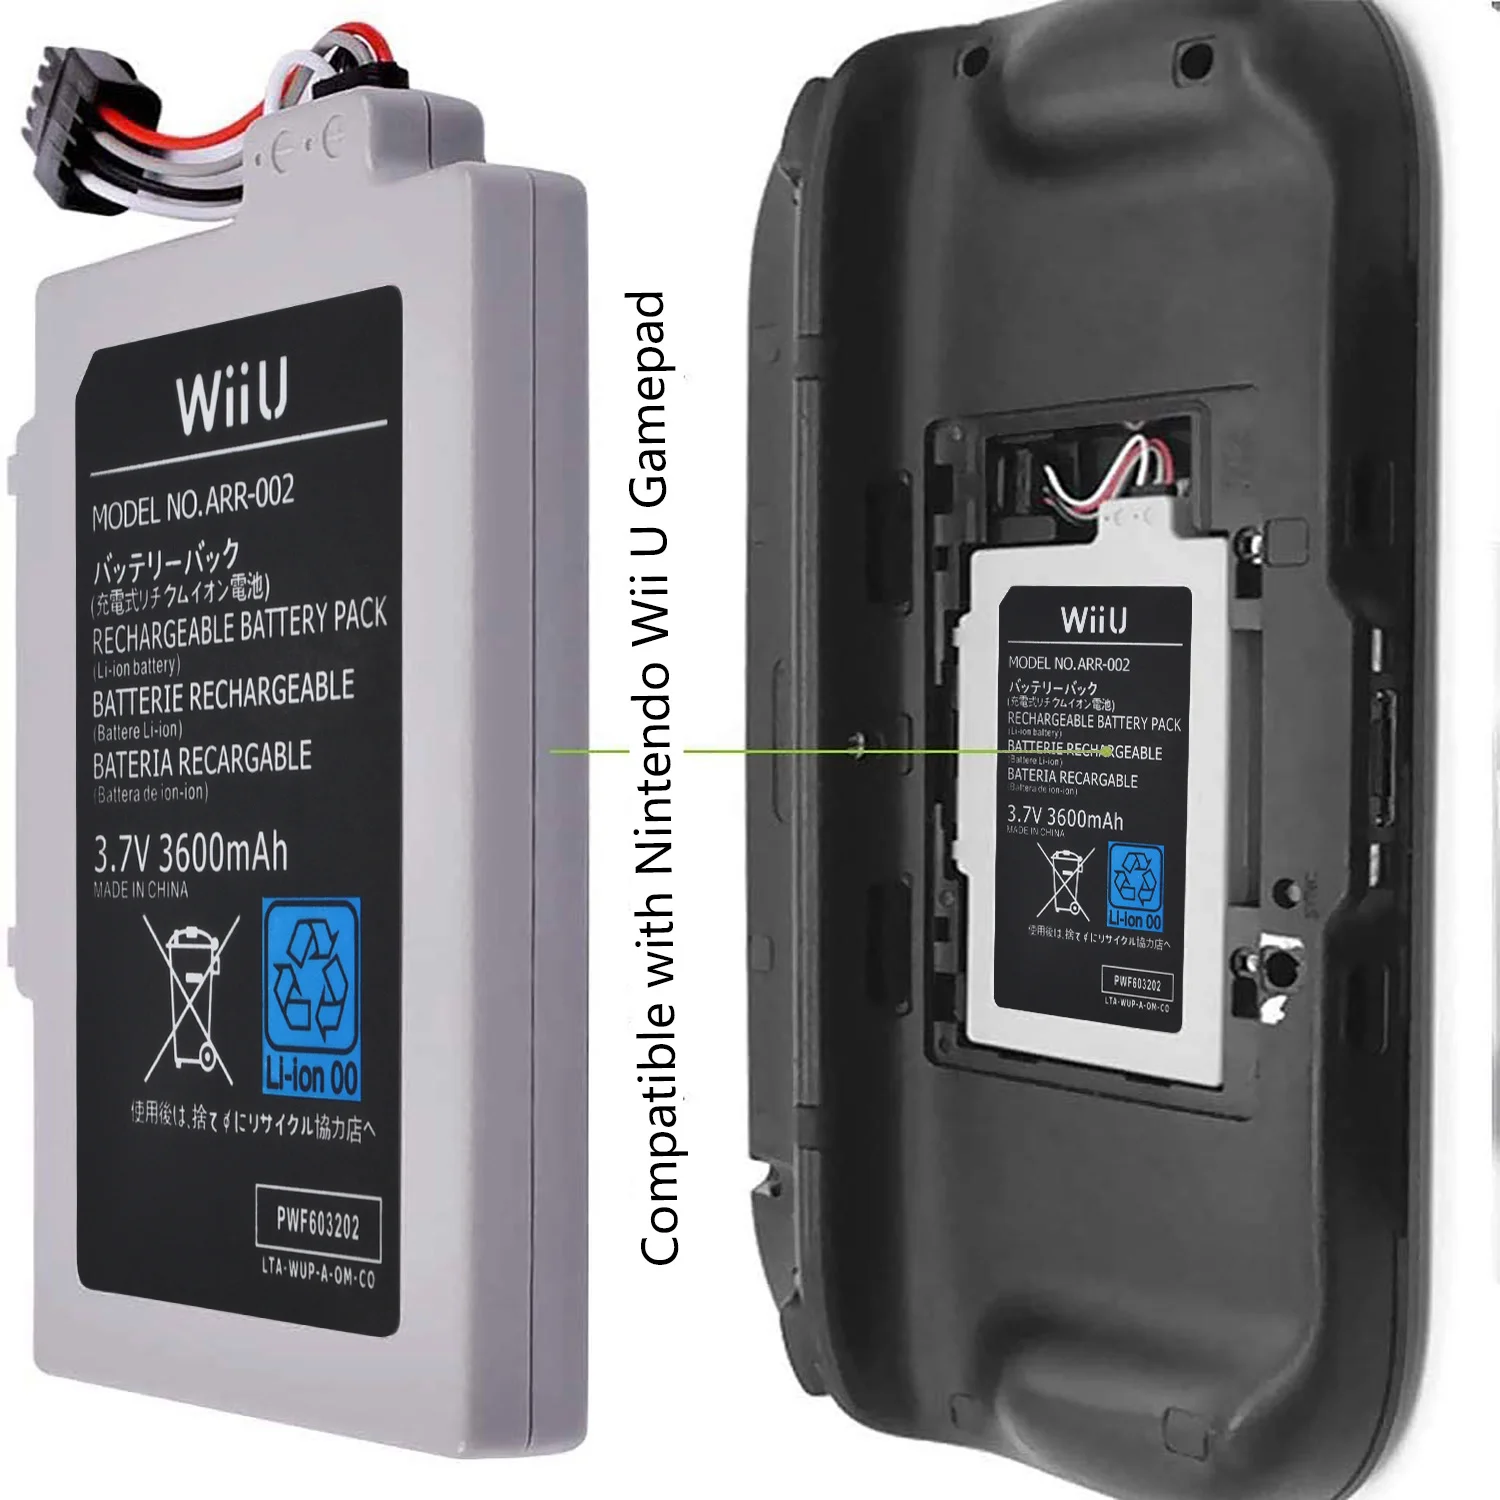 3600mAh ARR-002 Rechargeable Battery for Nintendo Wii U Wireless Controller images - 6